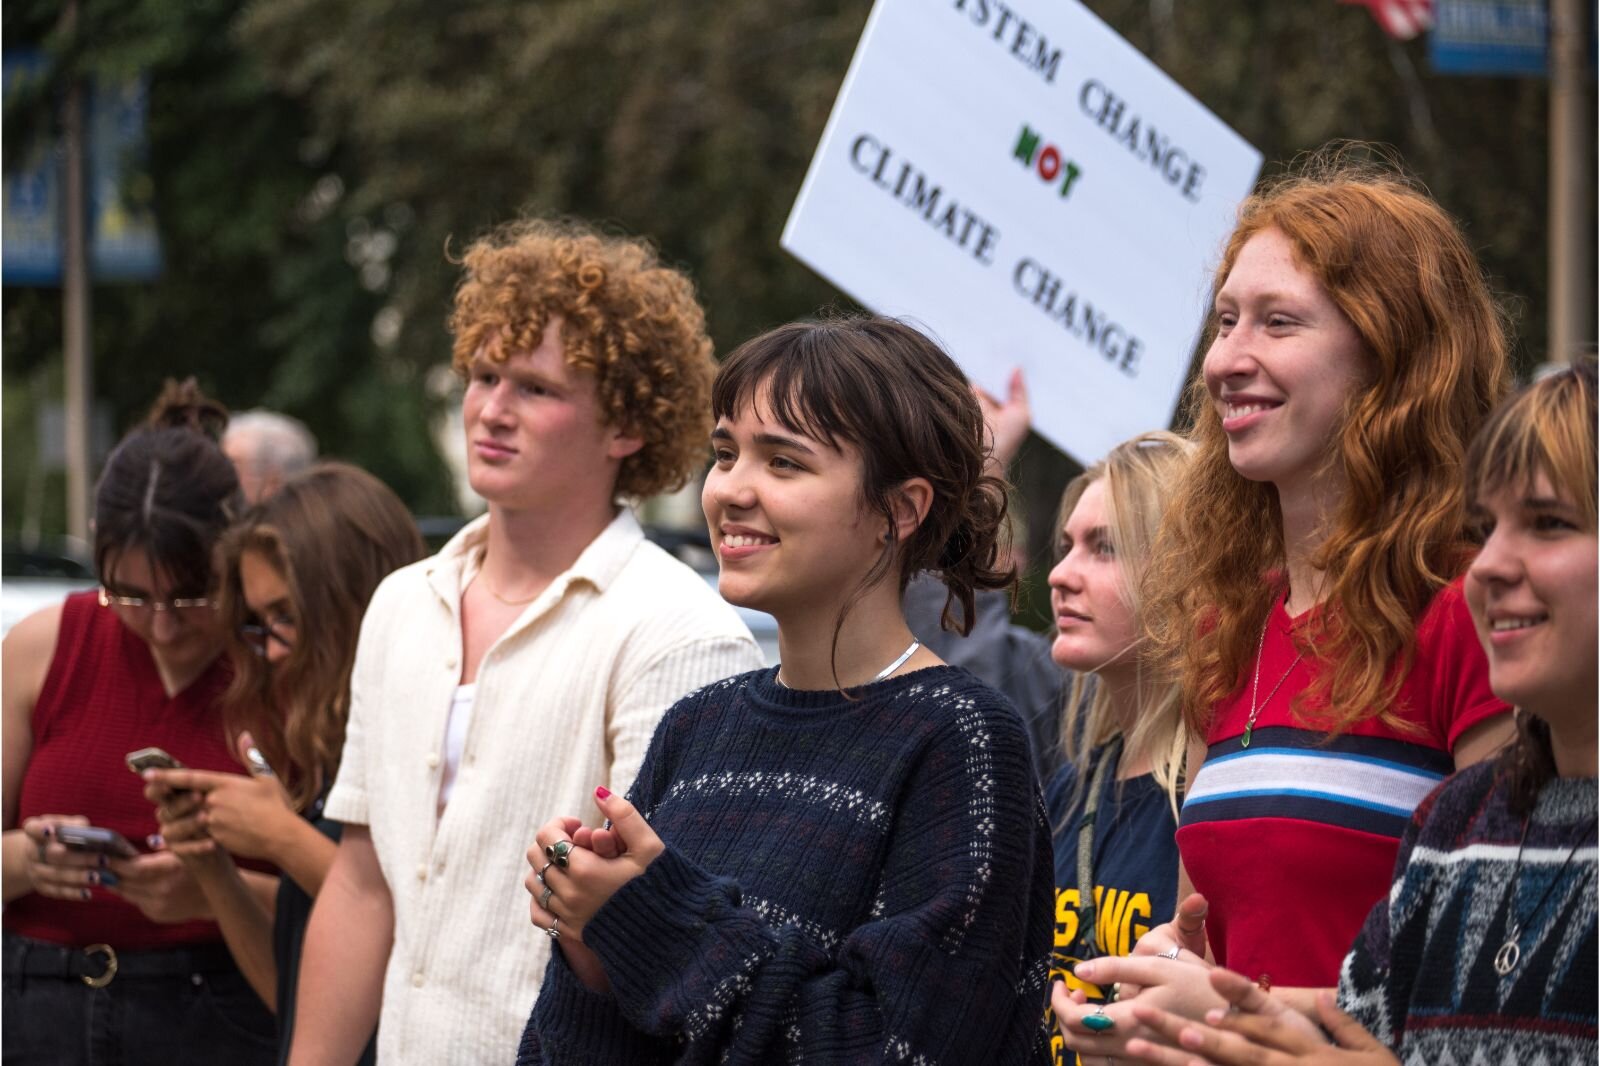 Passion and persistence characterized many of the youth who attended last Friday's Youth Climate Strike.